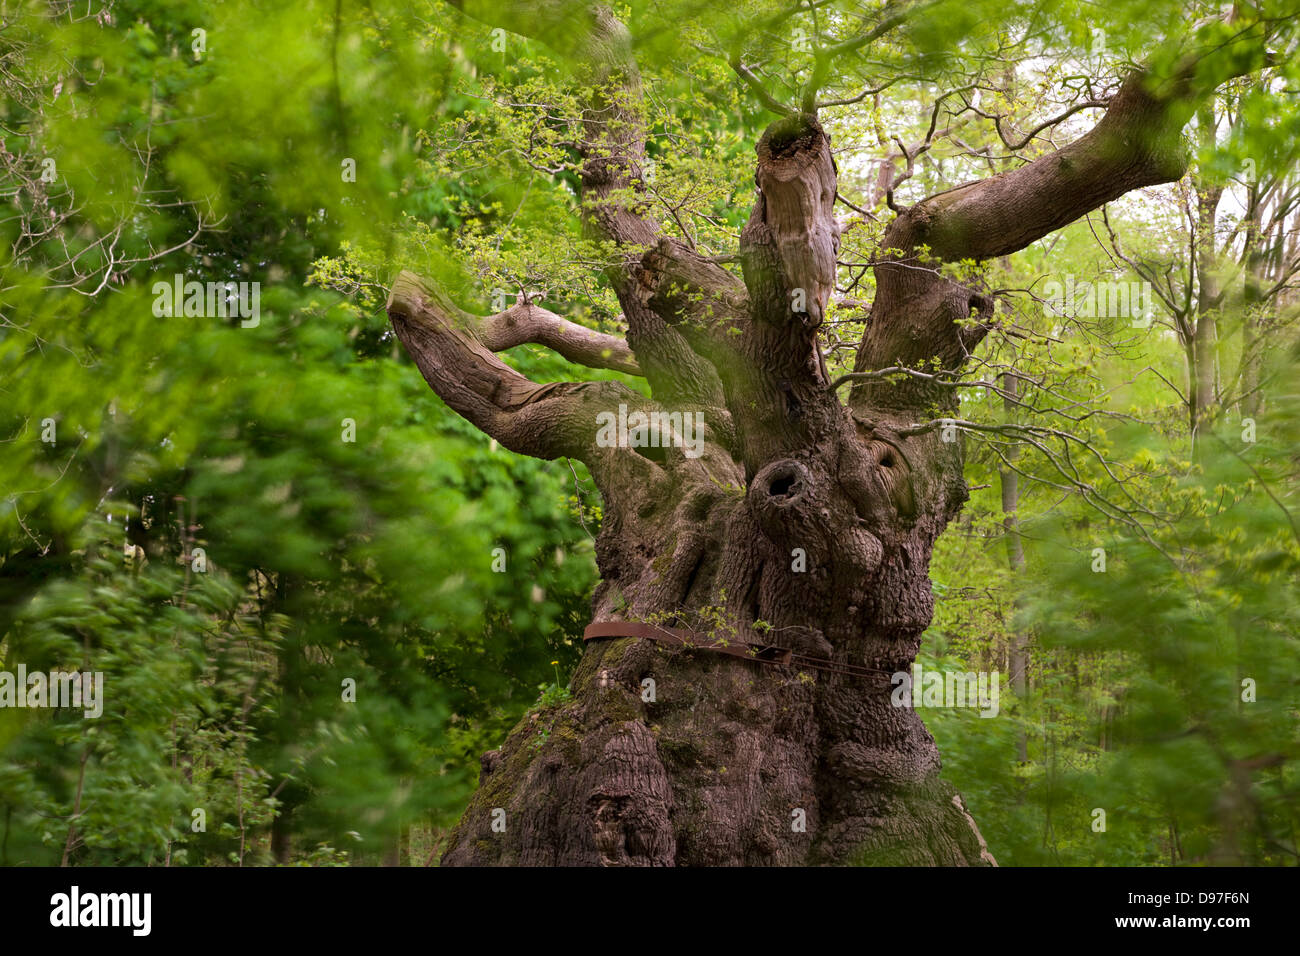 Over 1000 years old, the Big Belly Oak is the oldest tree in Savernake Forest, Marlborough, Wiltshire, England. Stock Photo